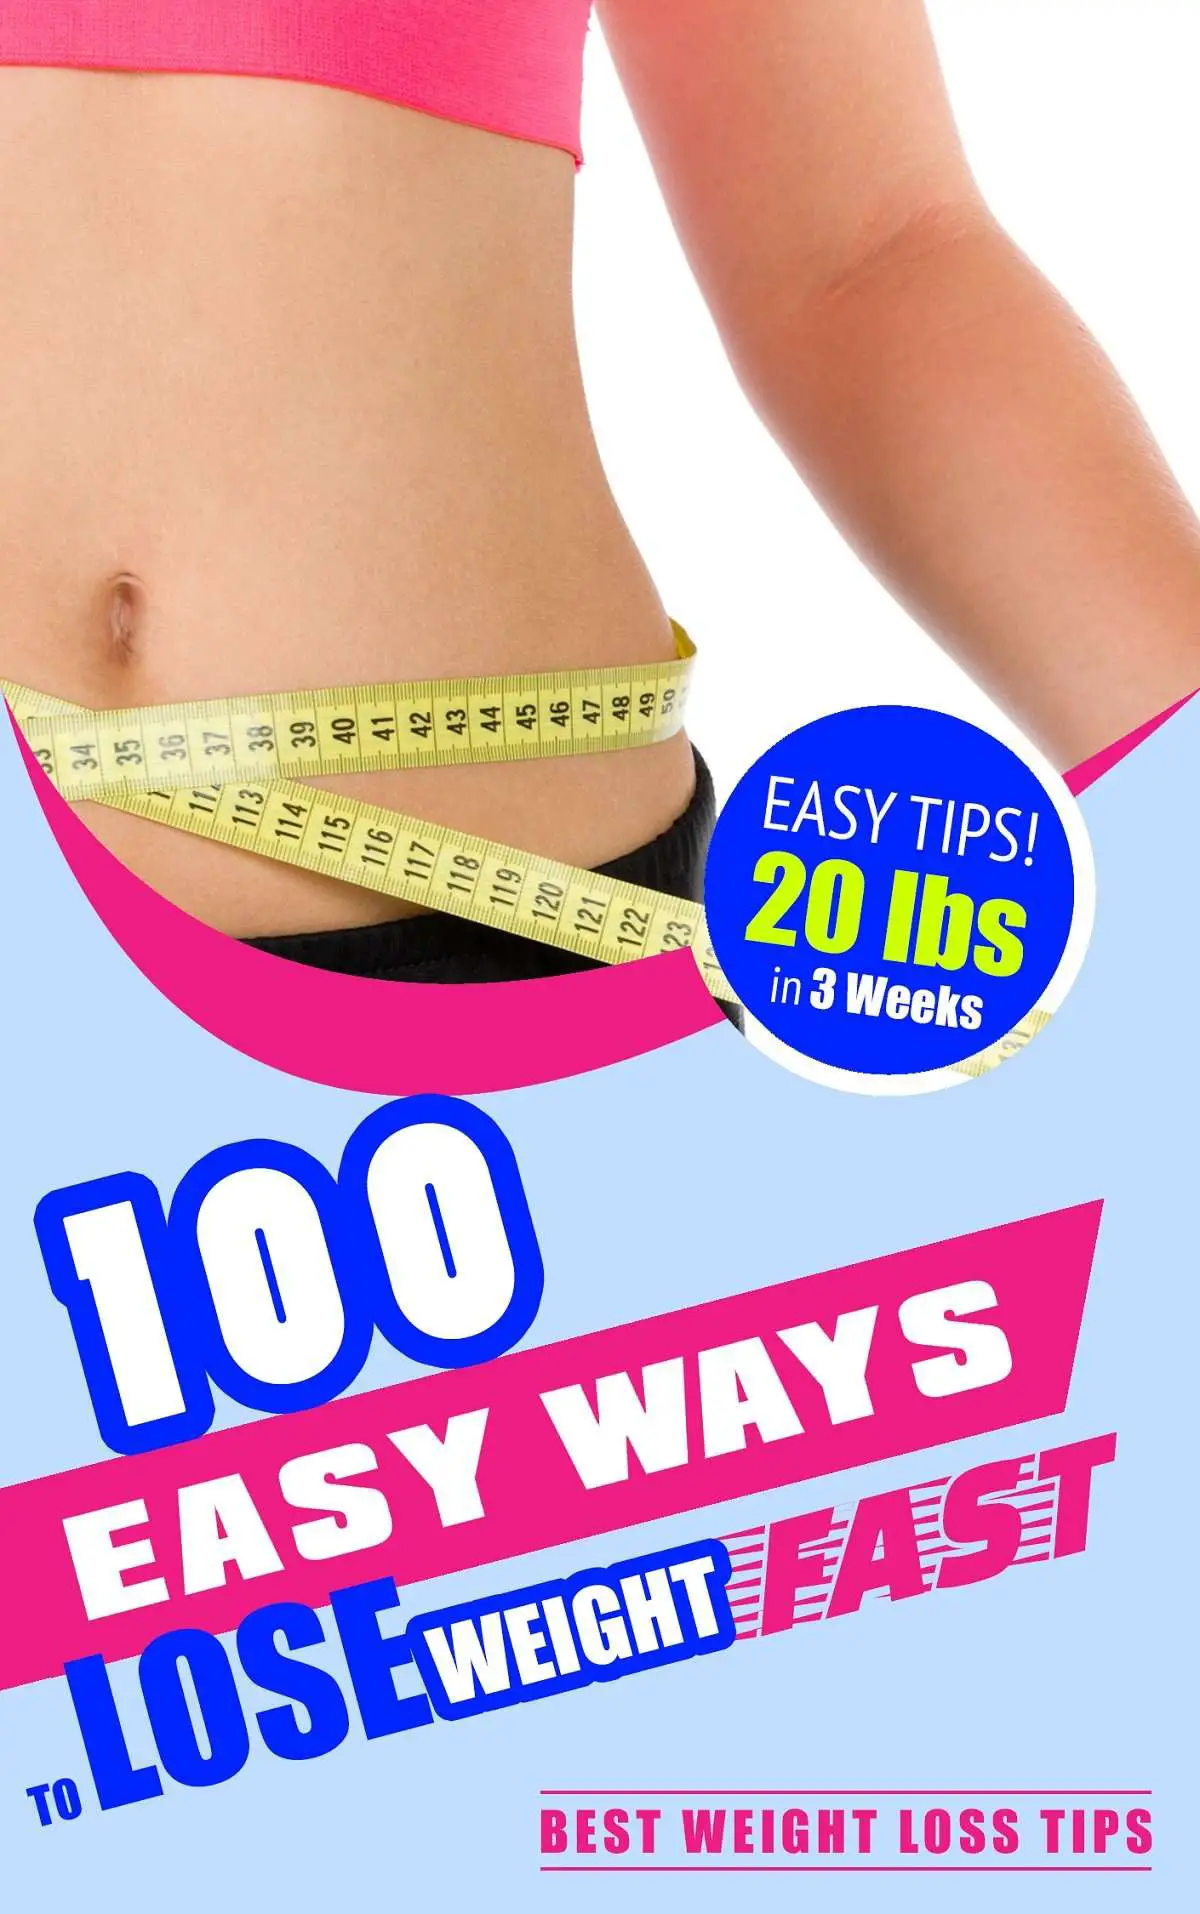 100 Best Ways and Tips to Lose Weight Fast